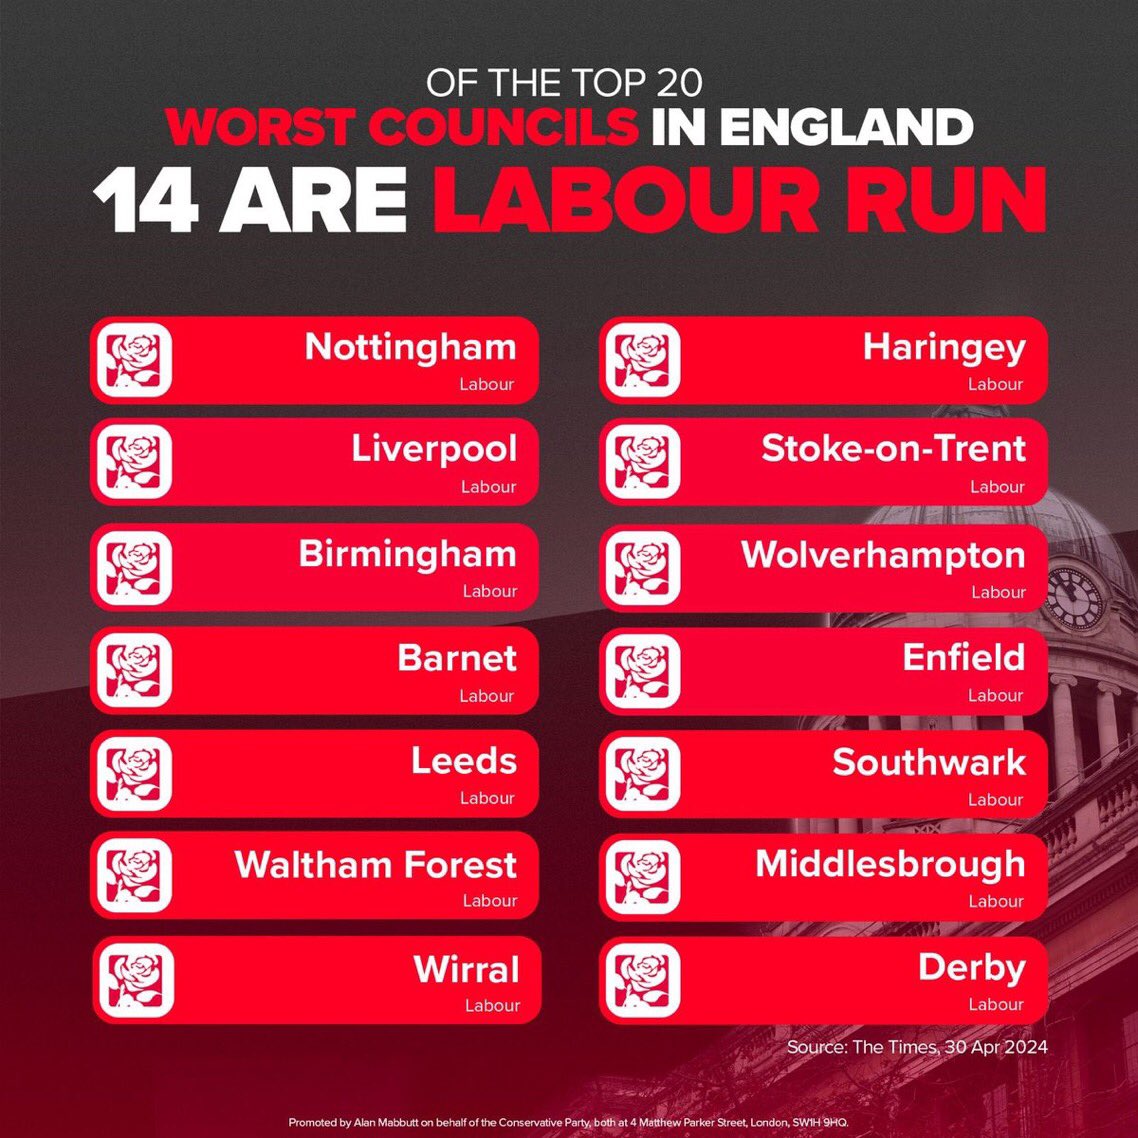 Worst councils in England and 14 run by Labour!